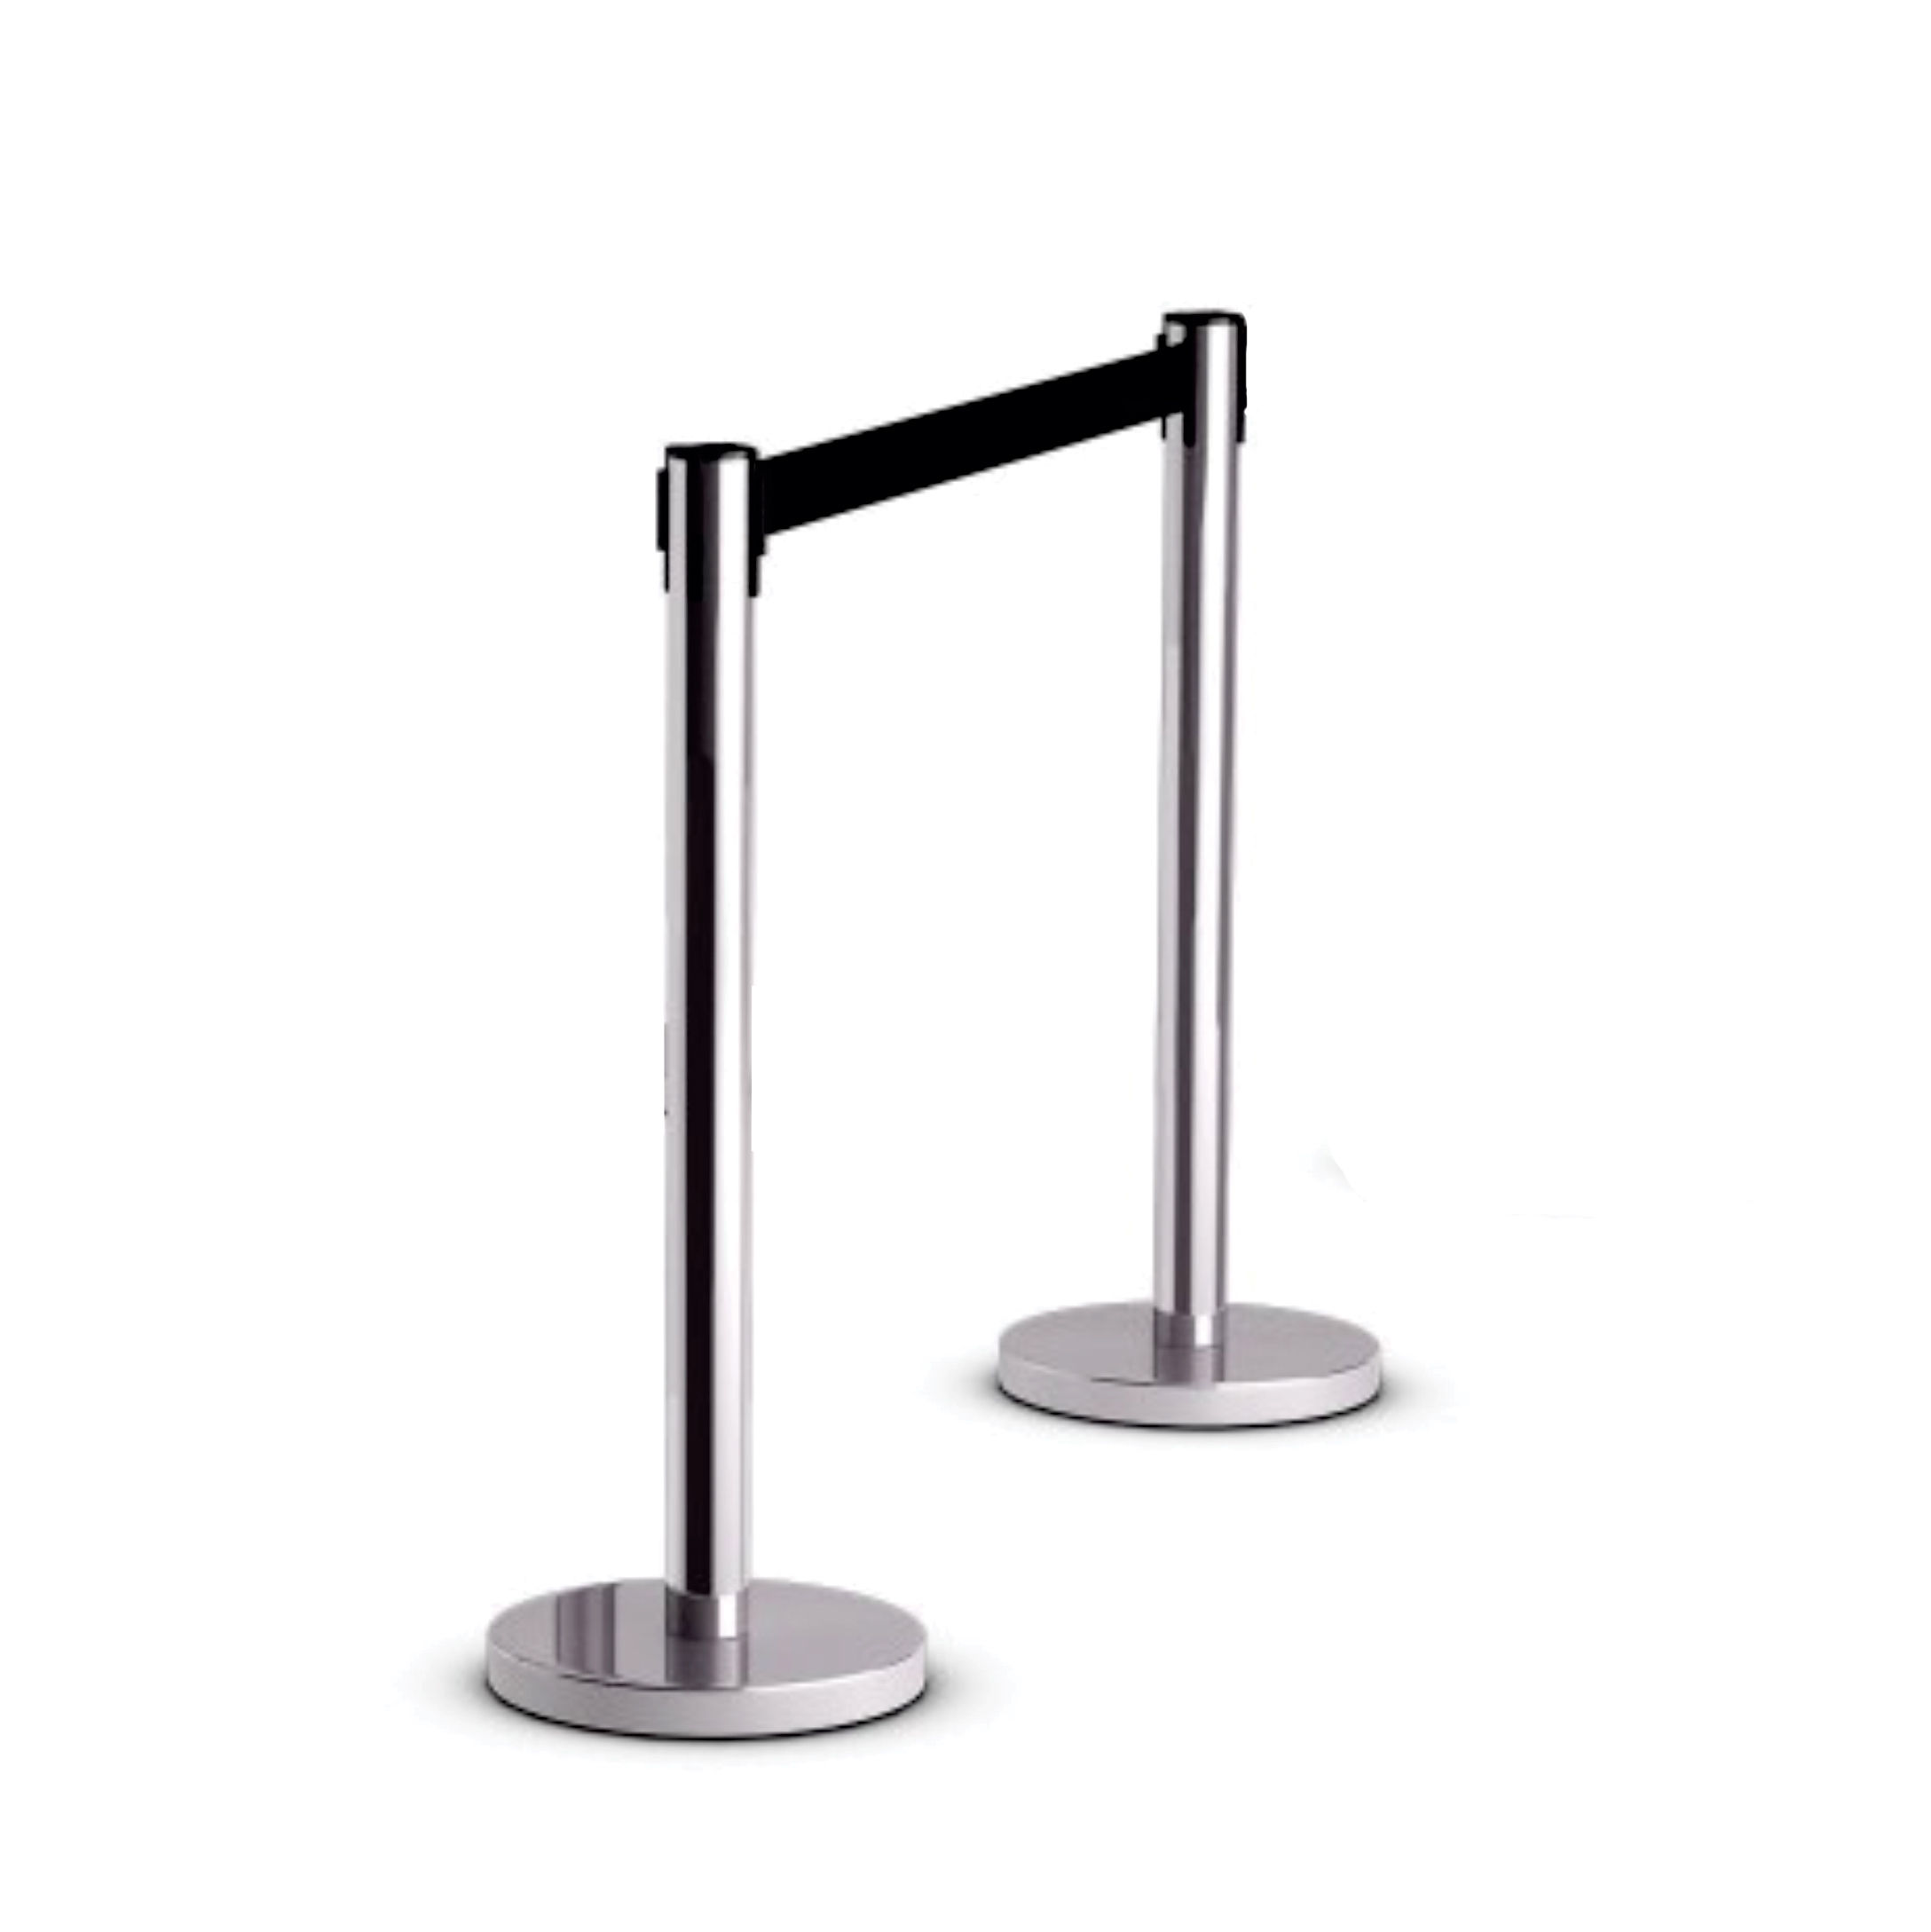 Box of 2 - Retractable Chrome Queue Barrier with Black Belt 910x320mm